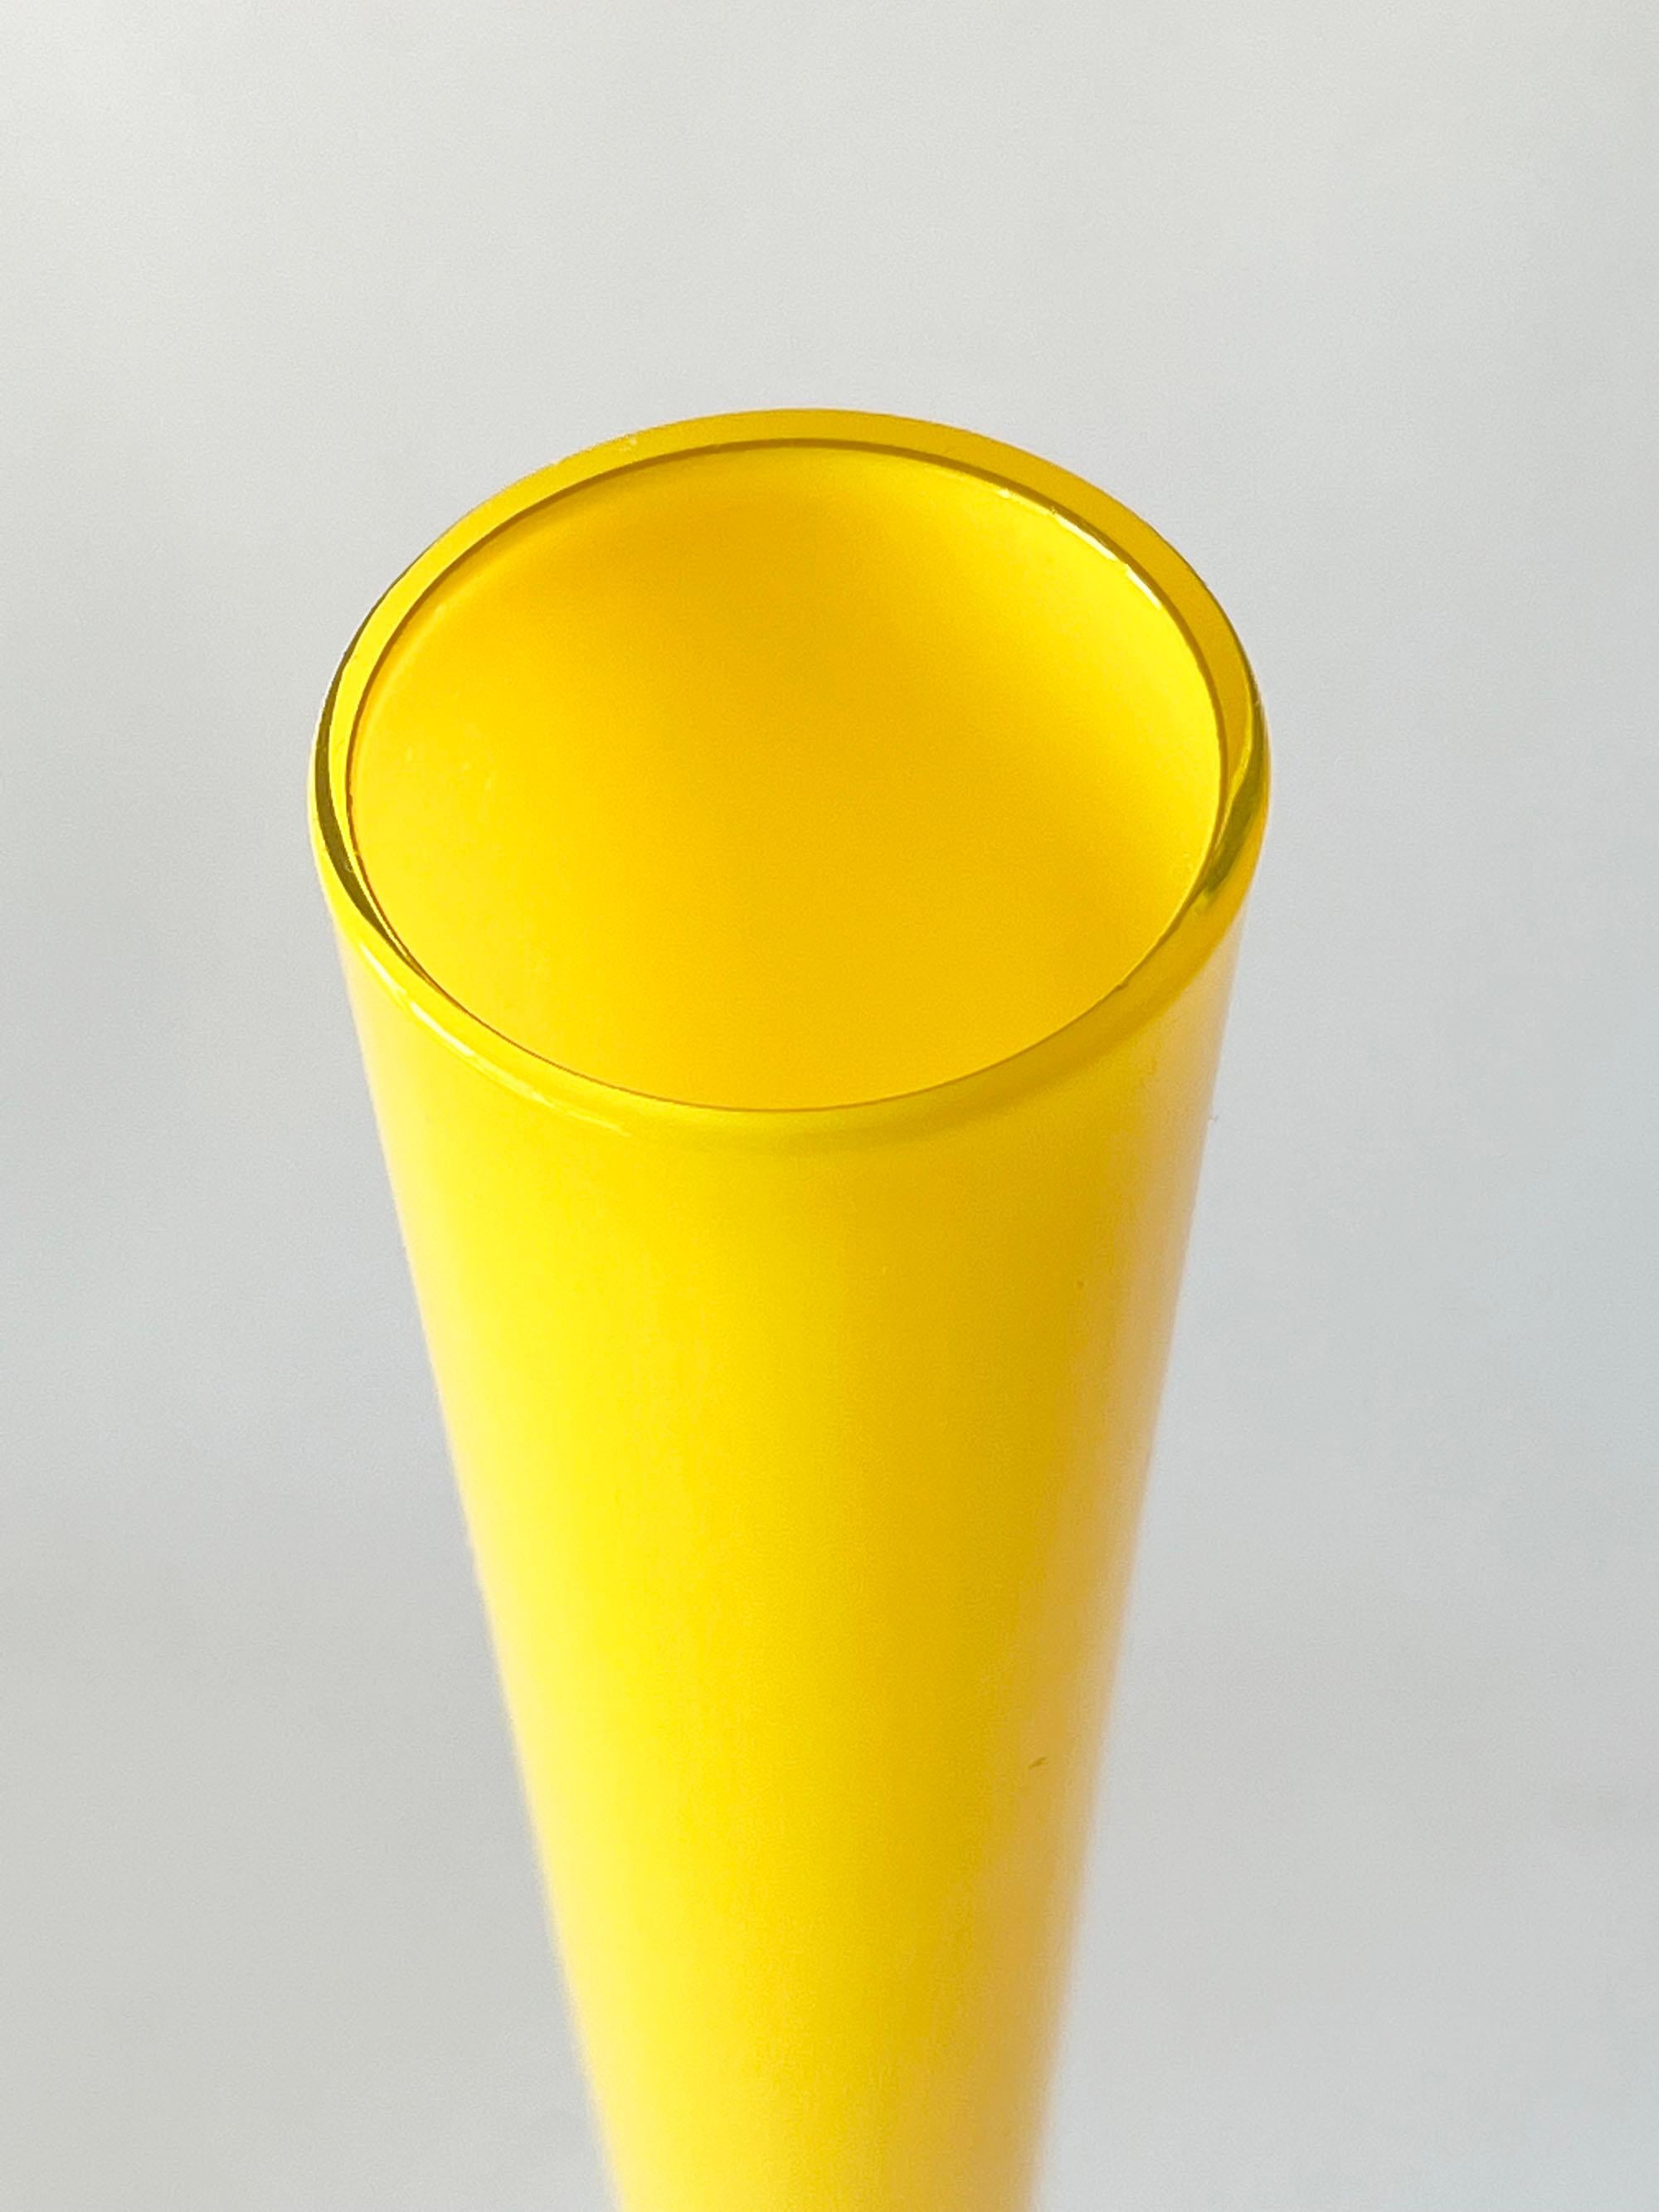 1930s Czechoslovakian Art Deco Streamline Yellow and Black Vase In Good Condition For Sale In Palm Springs, CA